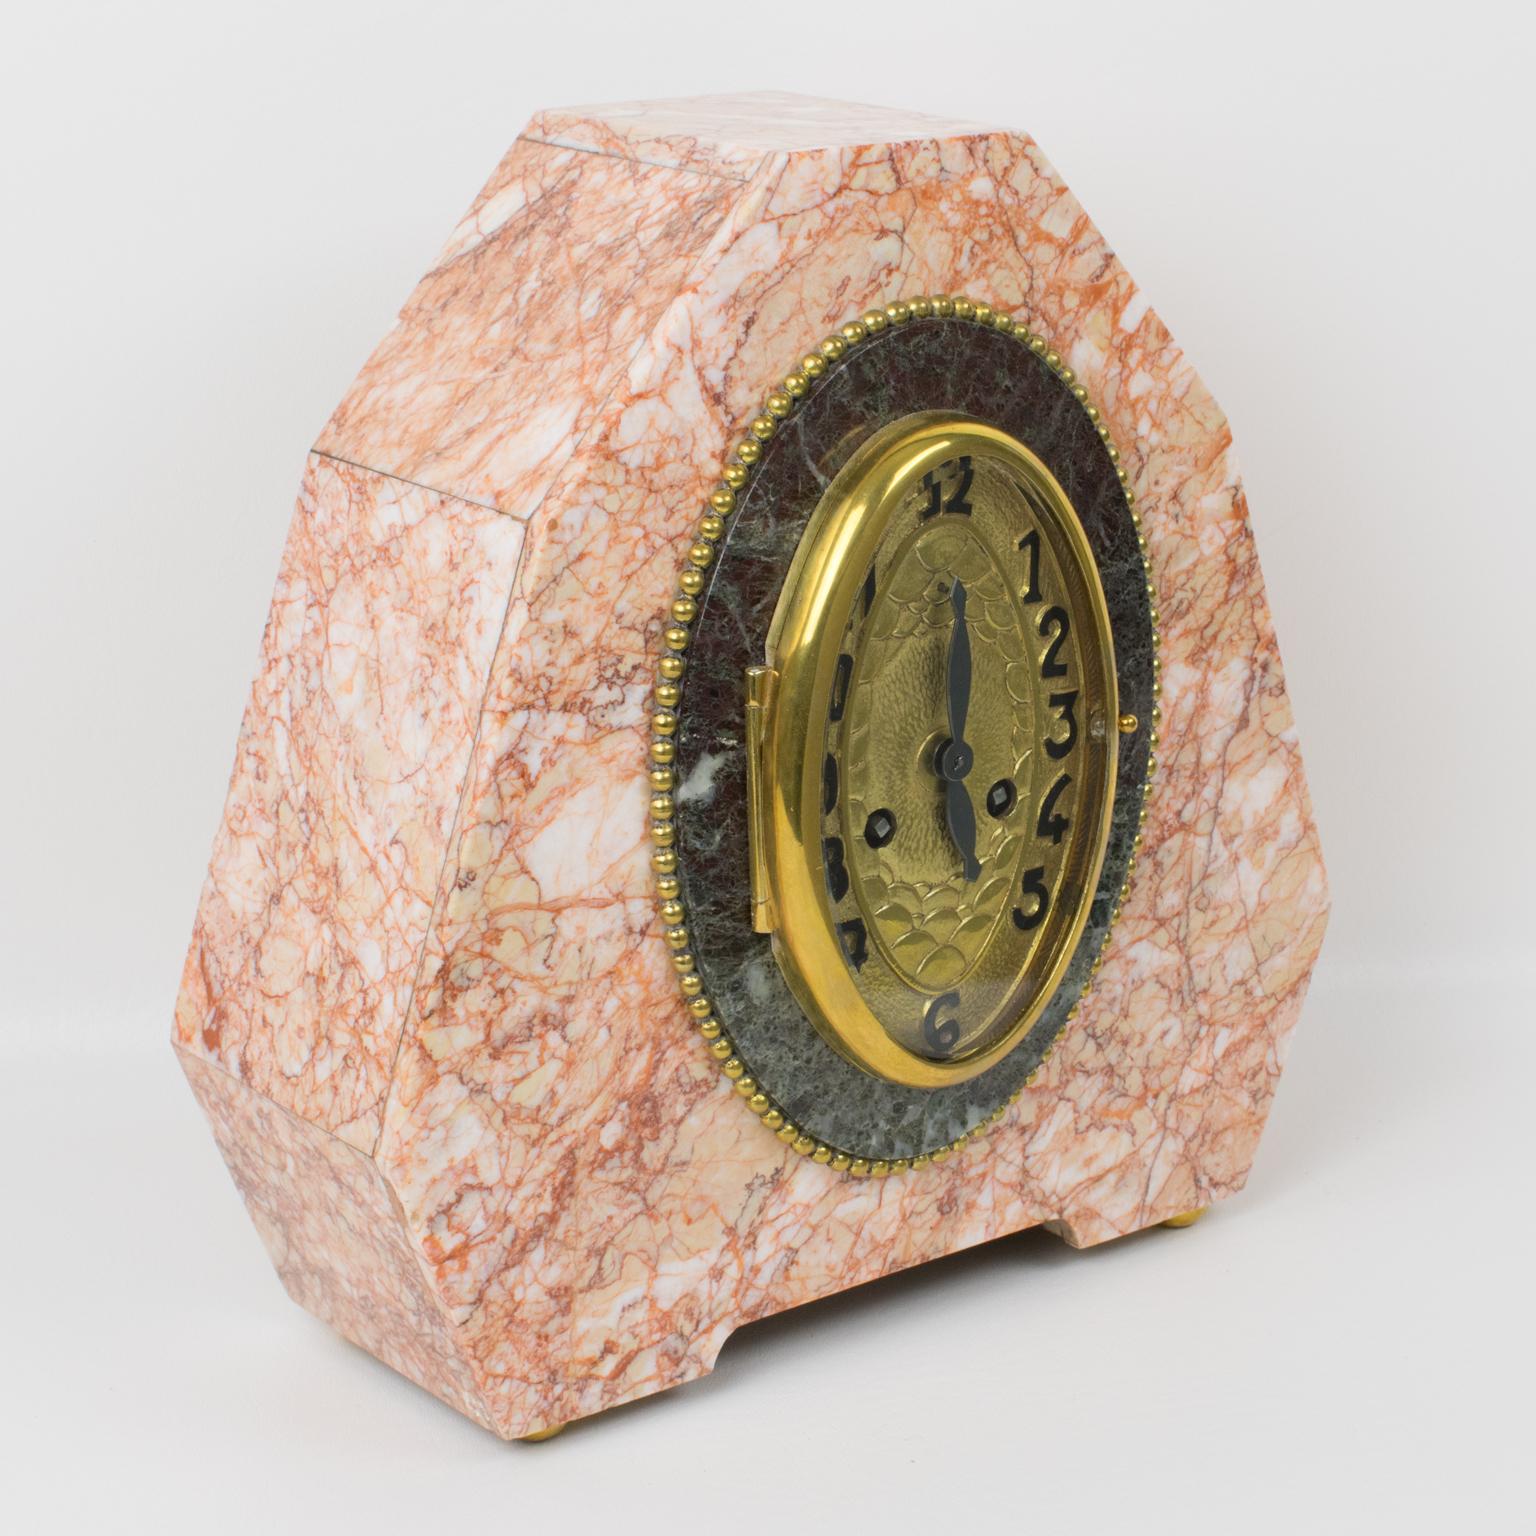 A stunning 1930s French Art Deco mantel clock in the style of Sue & Mare. The geometric case is solid pink marble with forest green marble detailing, the bezel and face are in gilded bronze with fine Art Deco decor. Very iconic Art Deco stretched